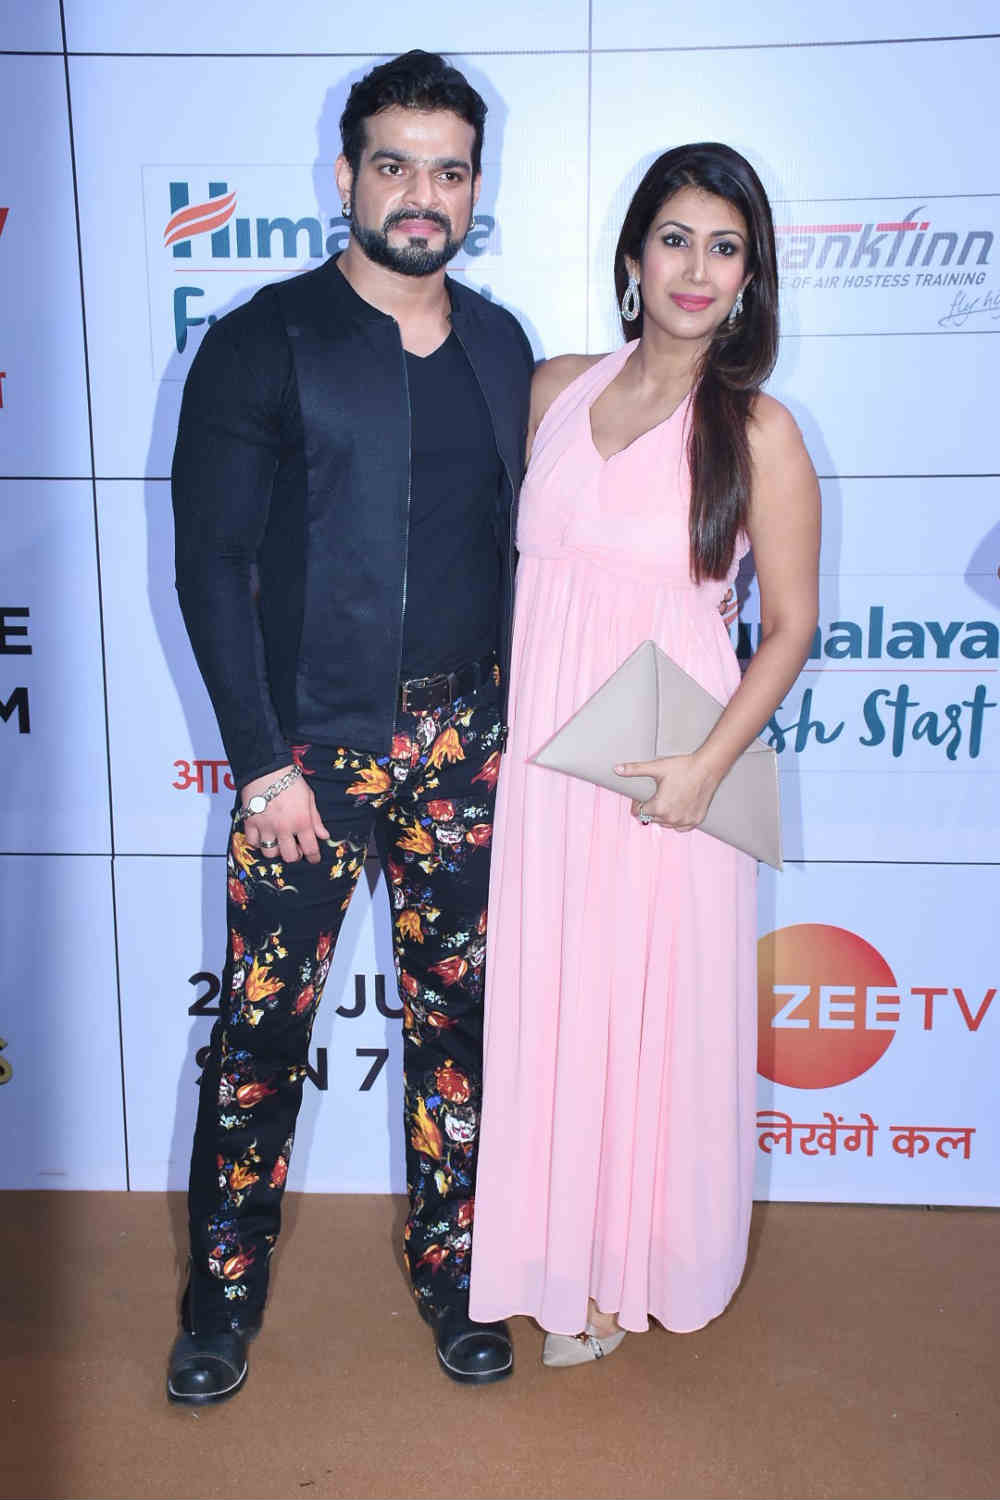 Karan Patel's wife Ankita Bhargava suffers MISCARRIAGE after 4 months of pregnancy!